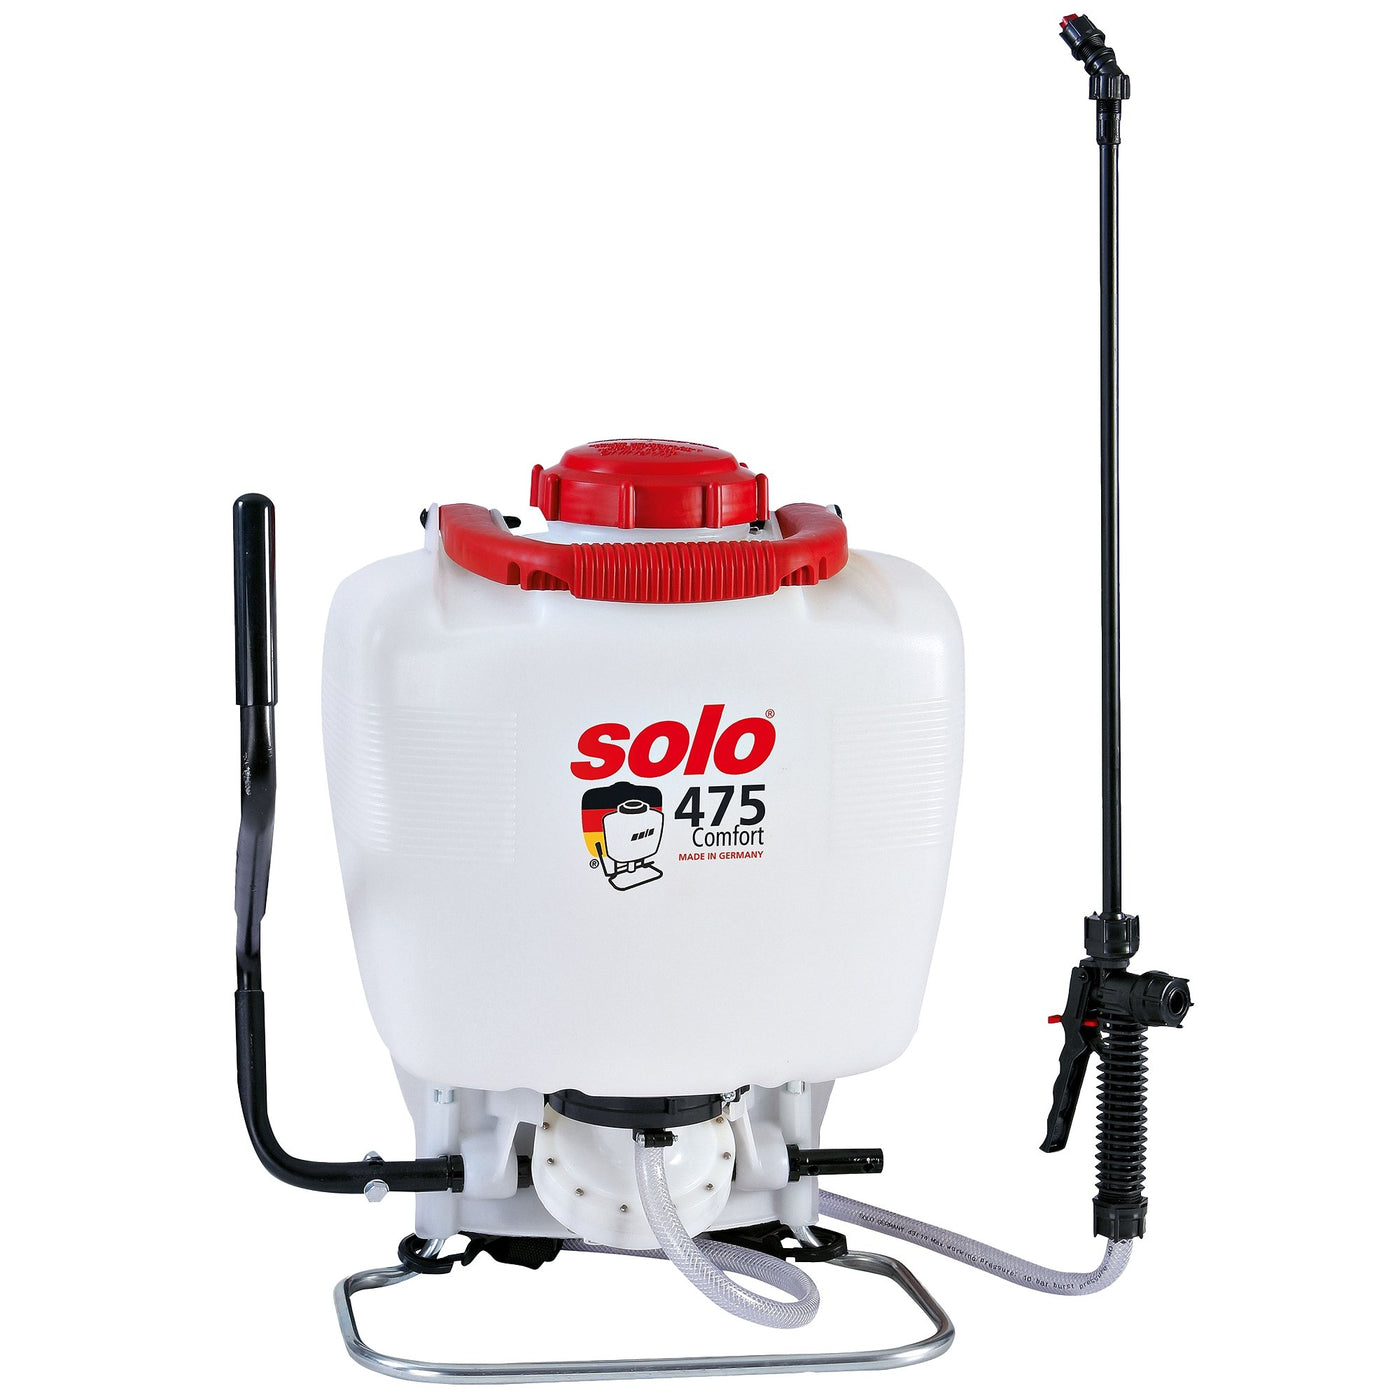 Solo Comfort backpack sprayer 475 15L diaphragm - Solo New Zealand